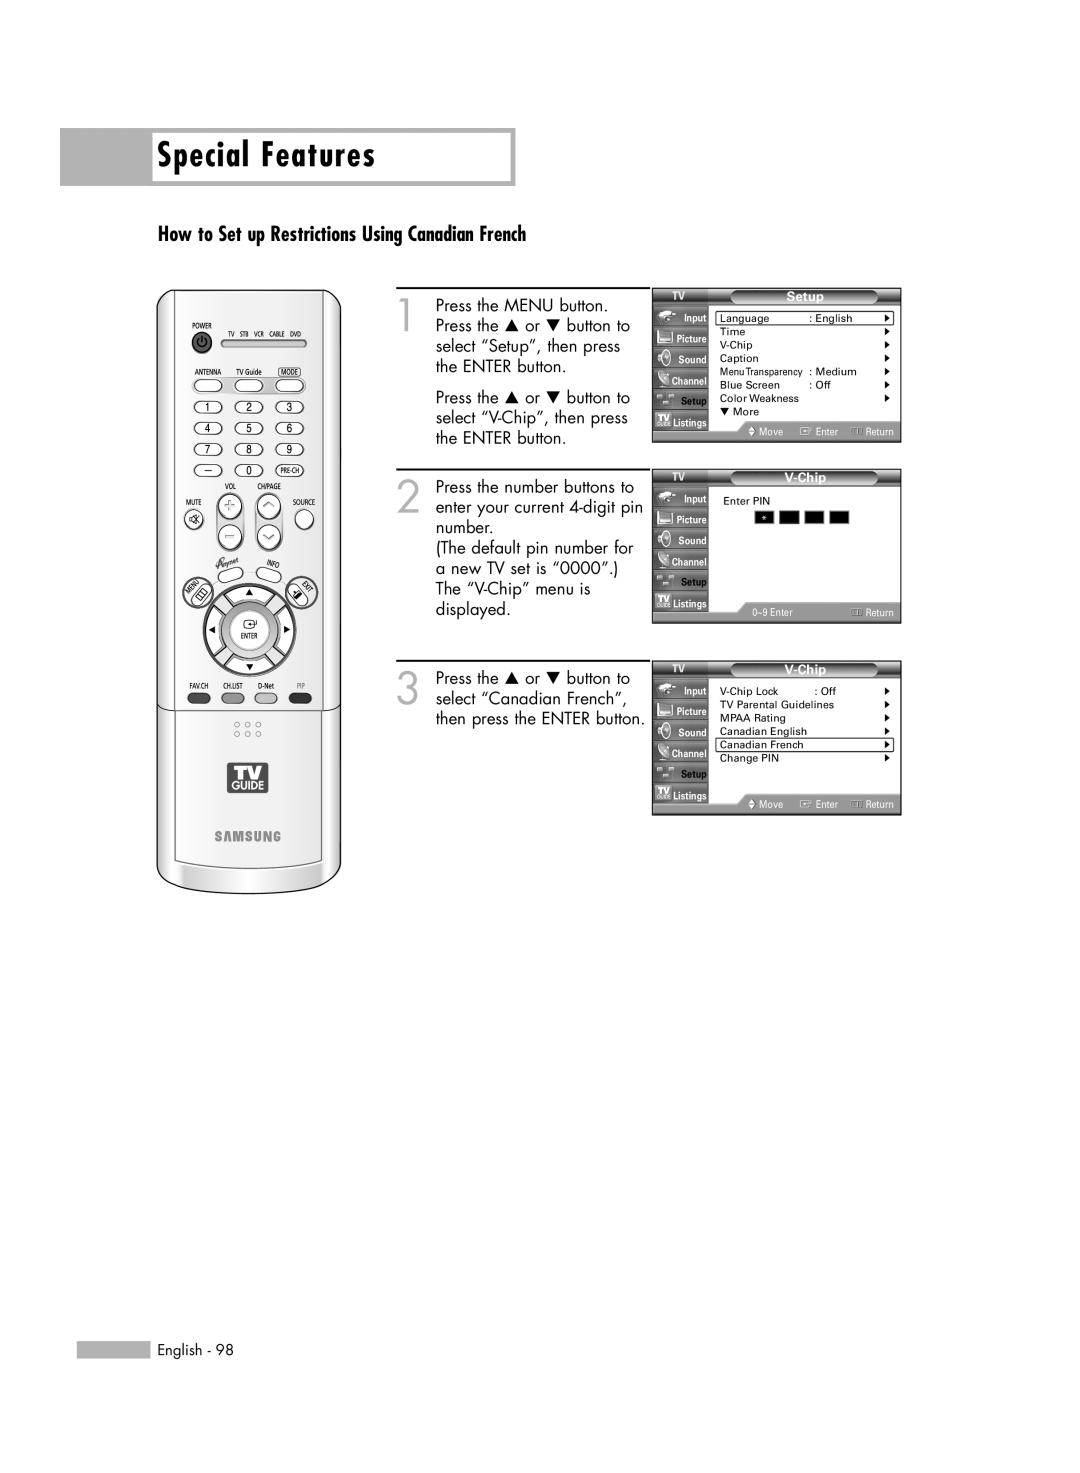 Samsung HL-R5688W manual How to Set up Restrictions Using Canadian French, Special Features 